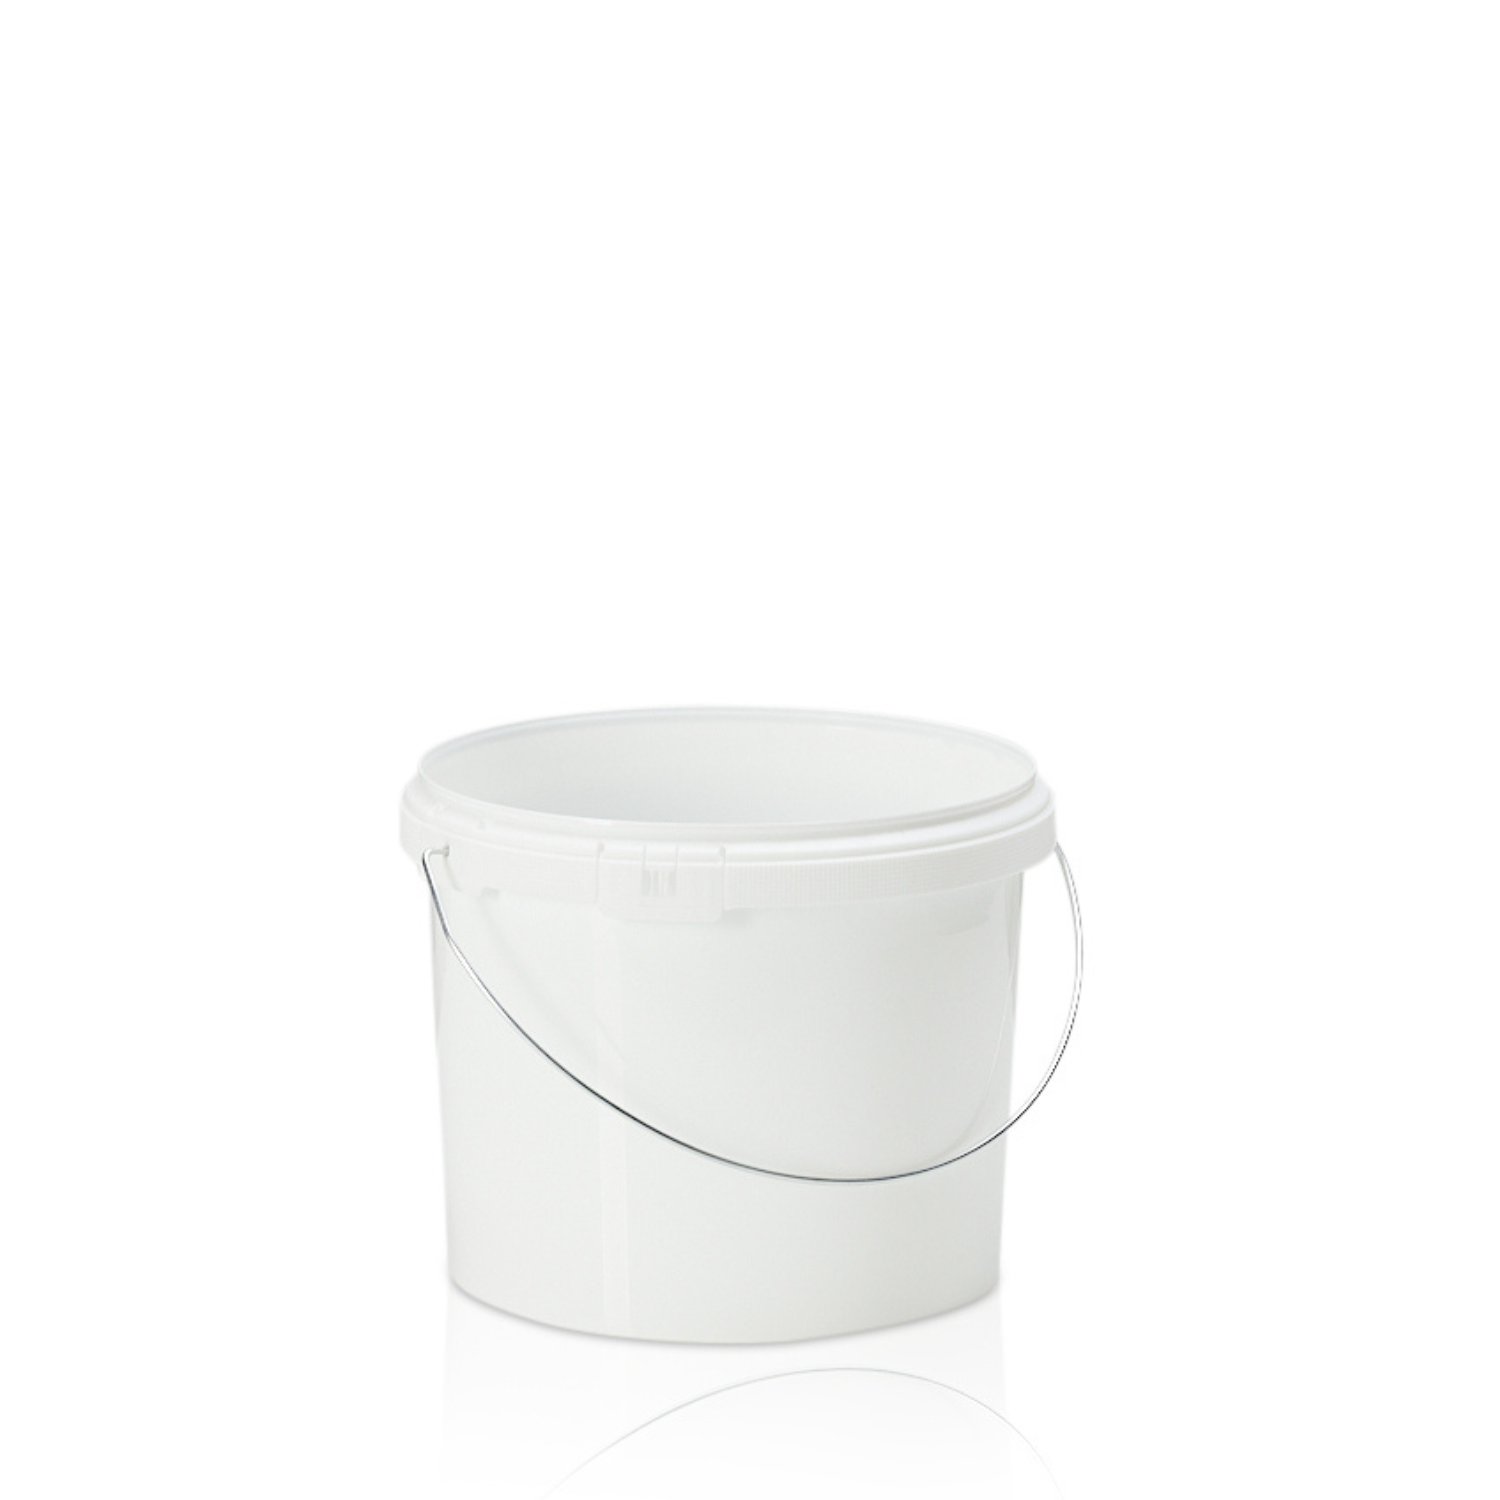 8ltr White PP Tamper Evident Pail with Metal Handle